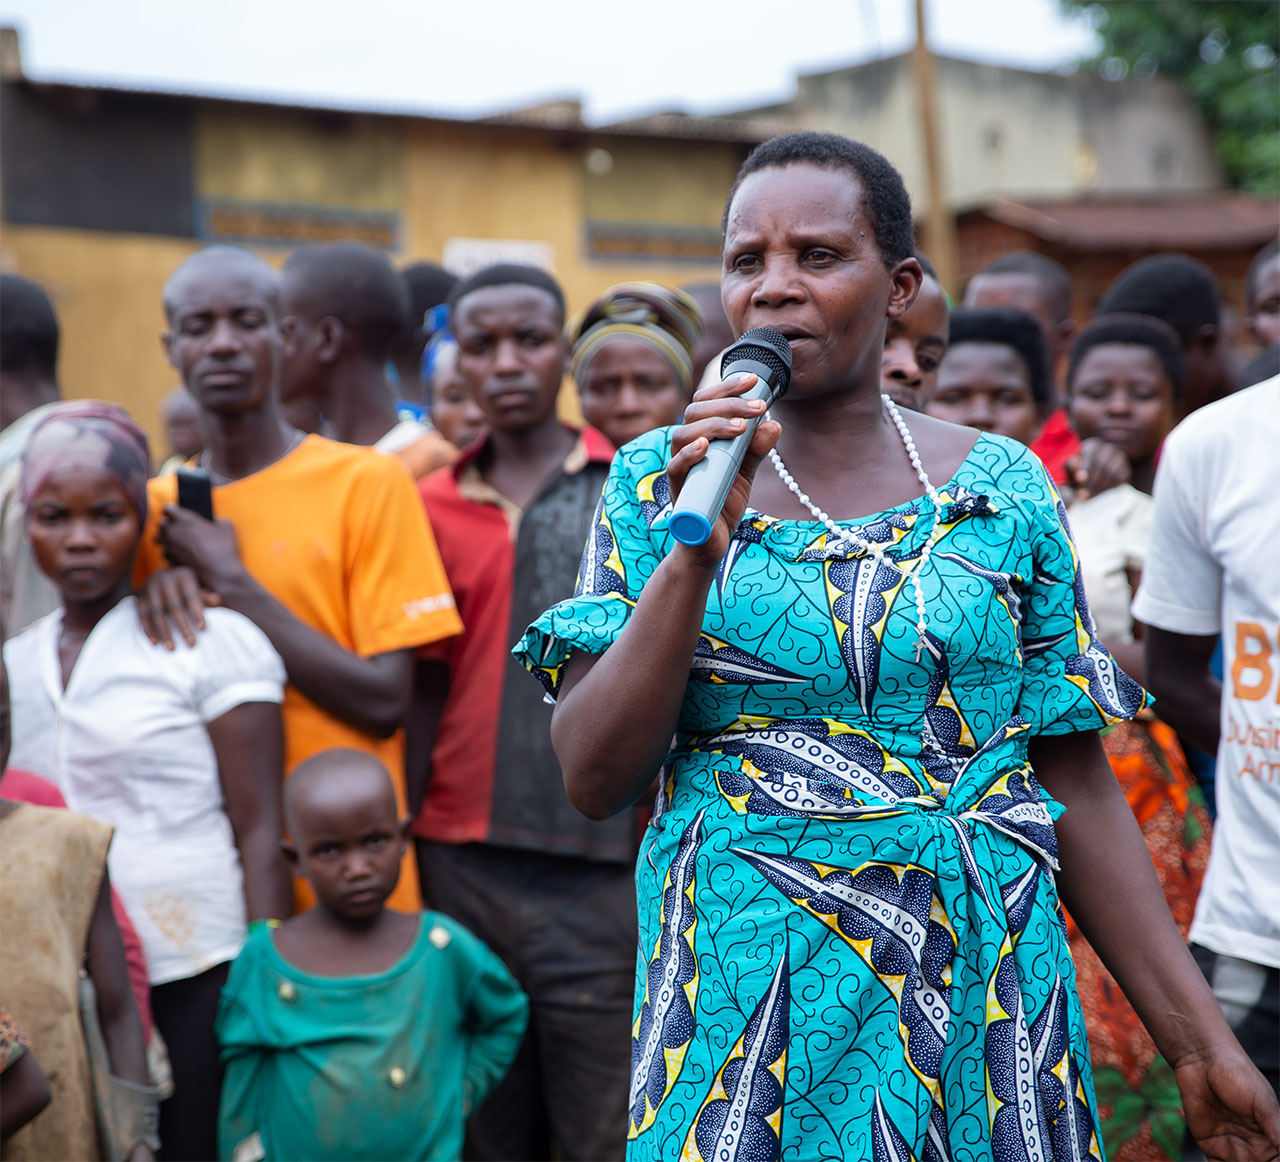 In Burundi, interactive theatre has been used as a key community-based transitional justice approach.